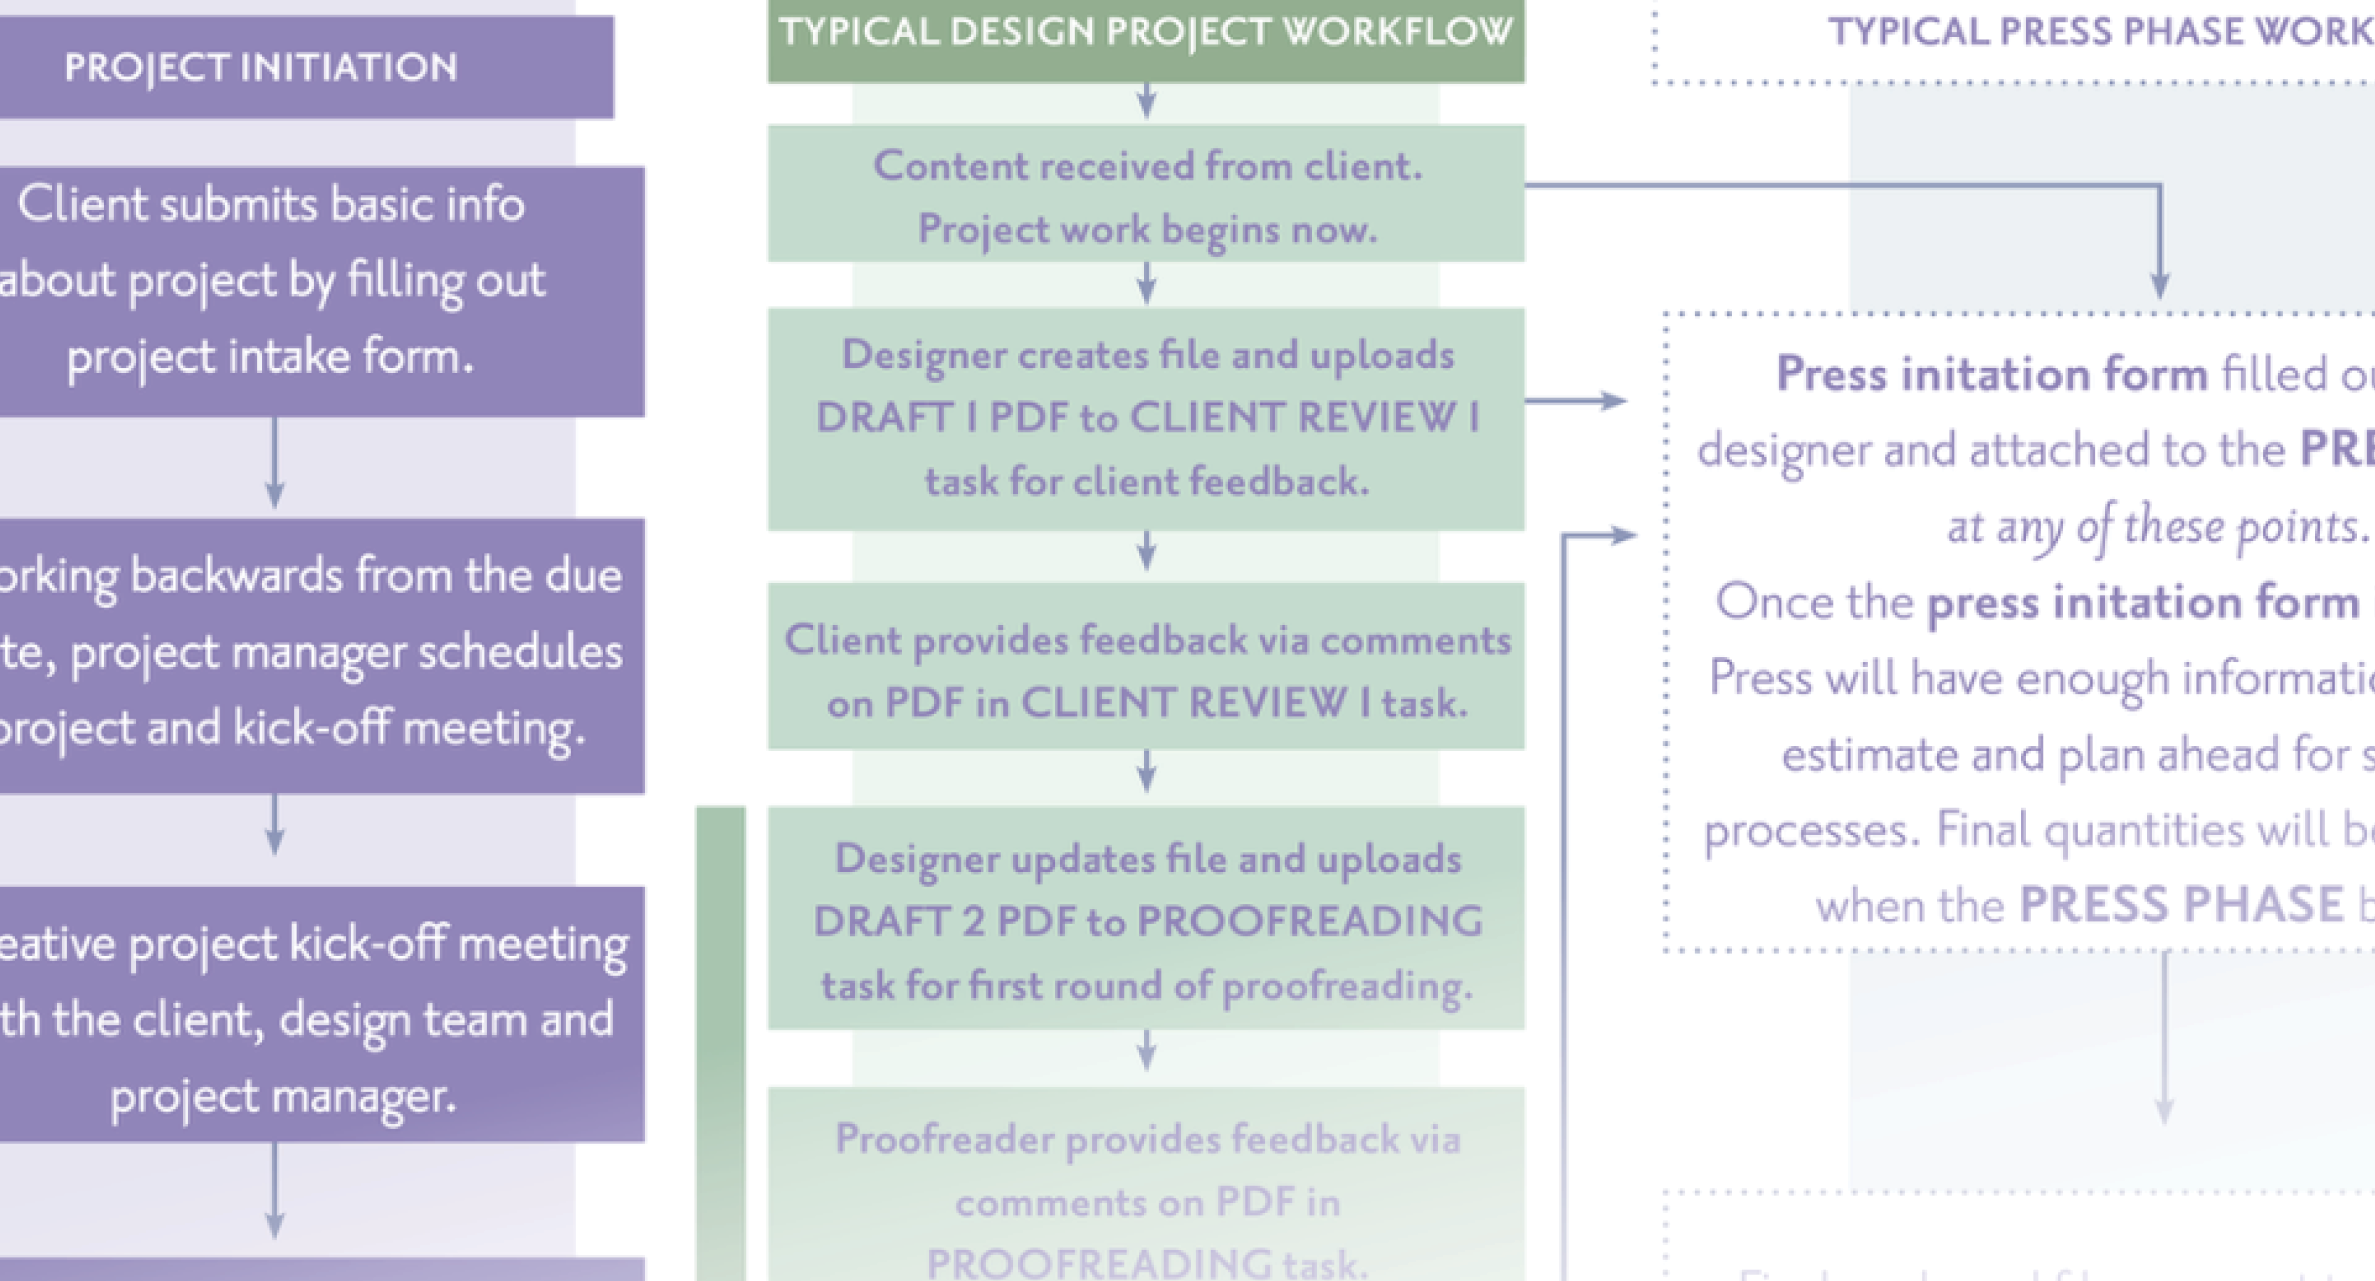 How to minimize last-minute design projects and strengthen strategic design